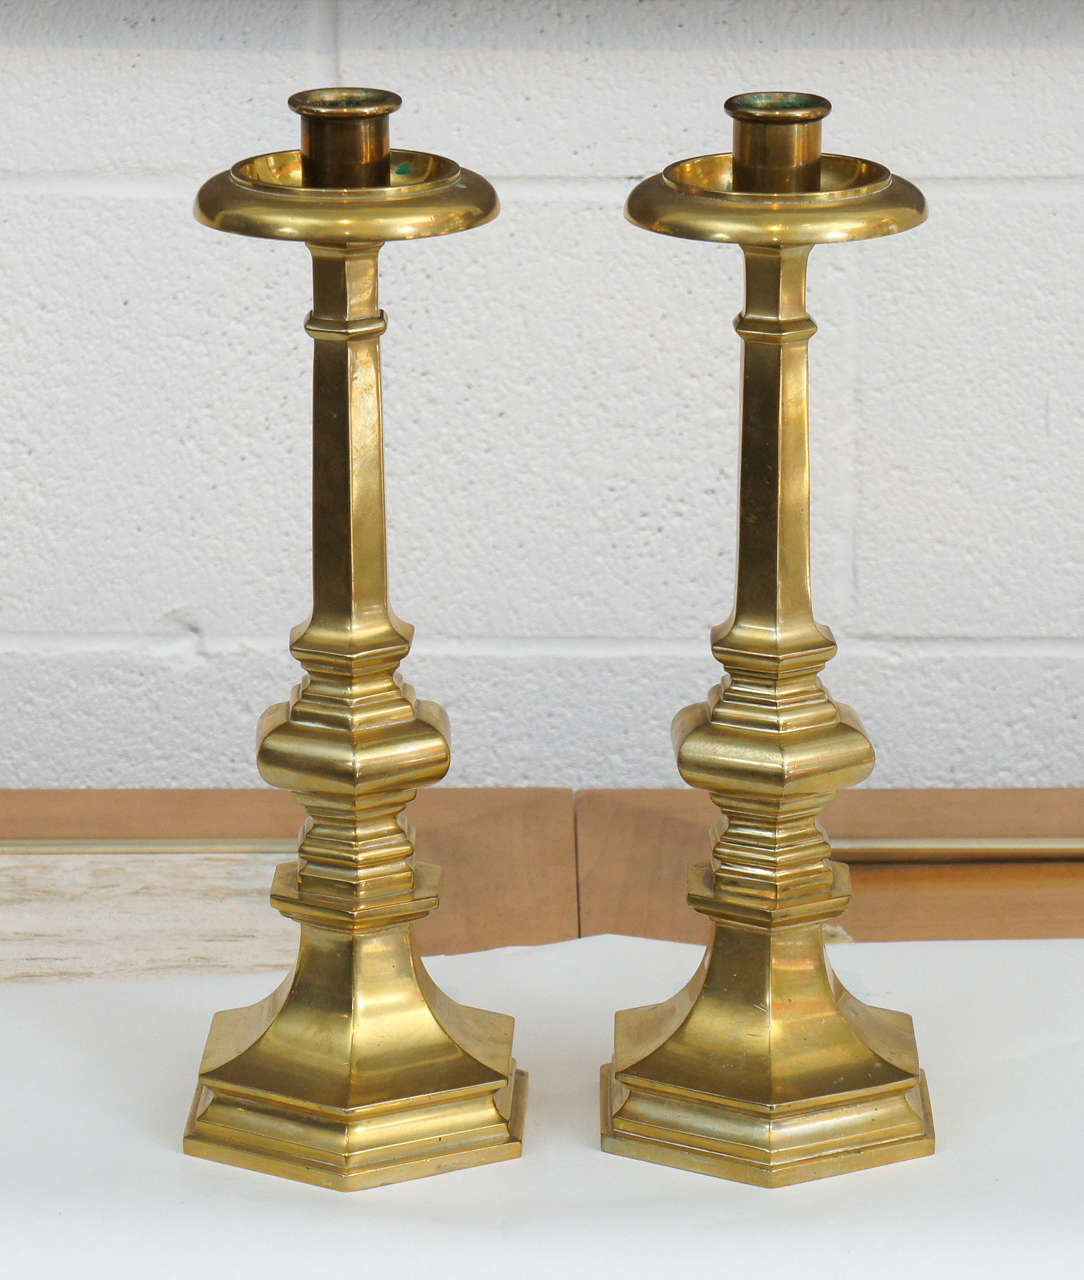 Here is a beautiful pair of Gorham solid brass candlesticks.